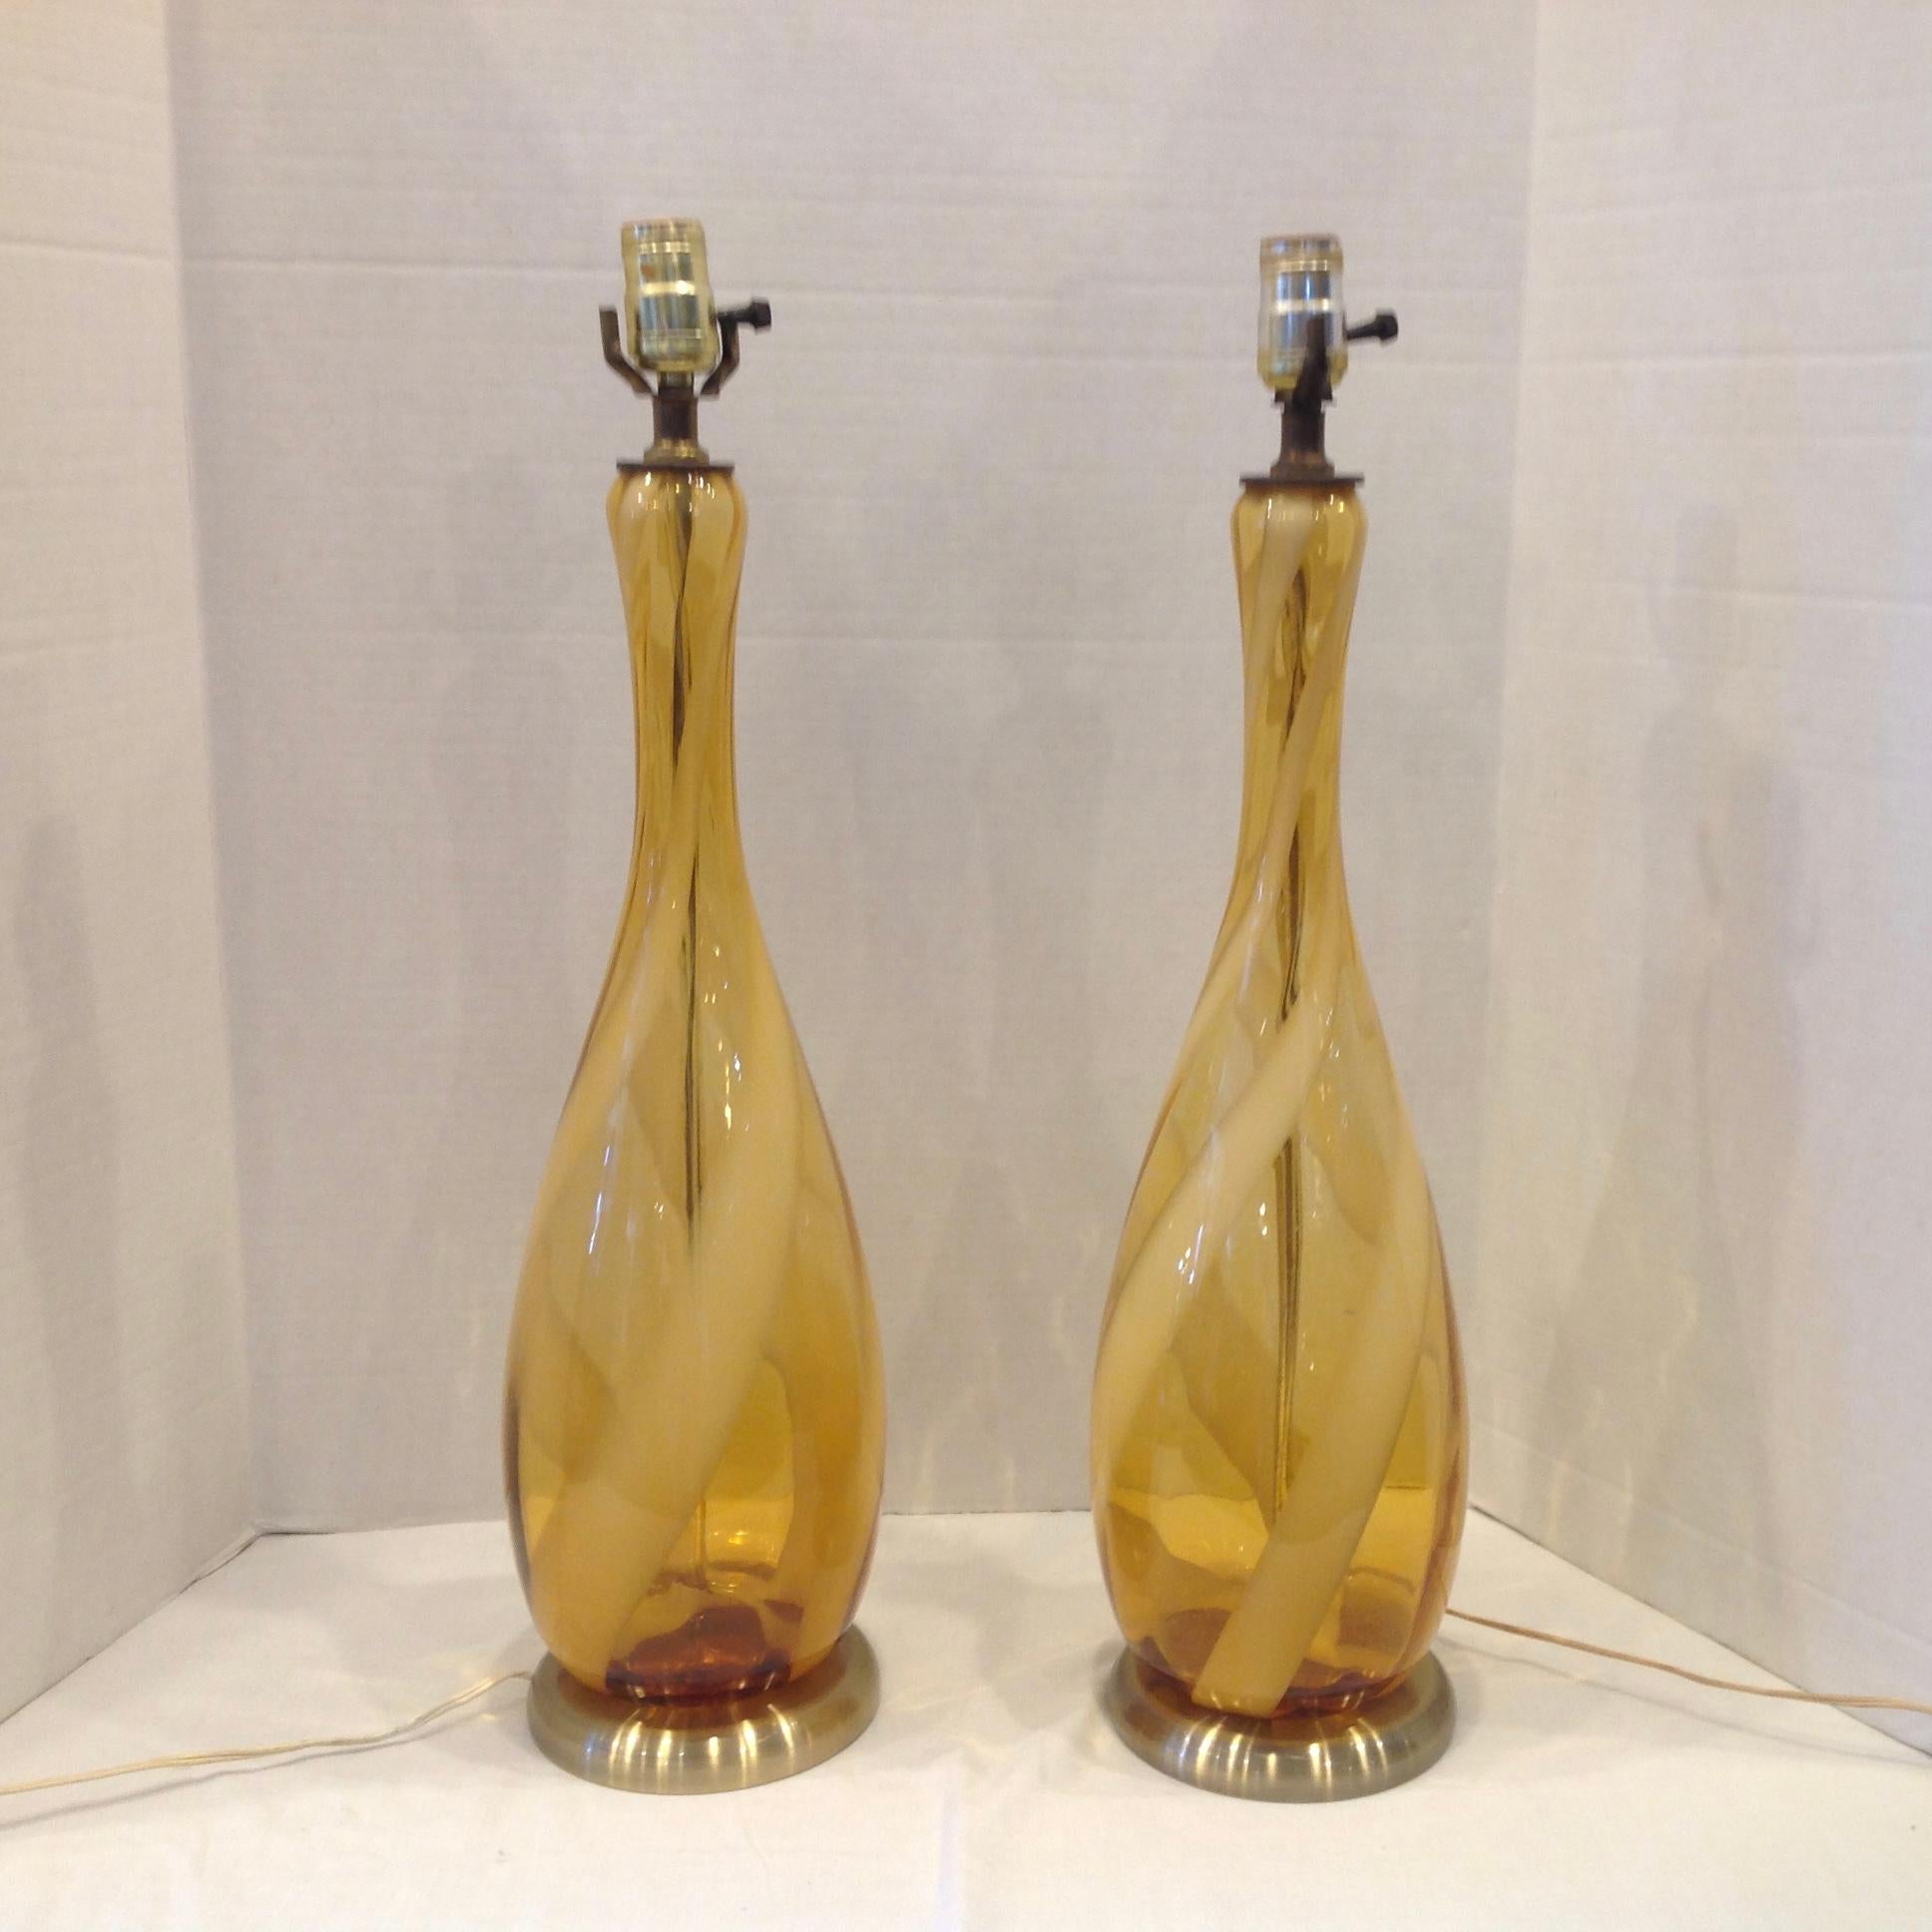 Wonderful color and height mounted on brass tone bases.
Lamps are measured to base of sockets.